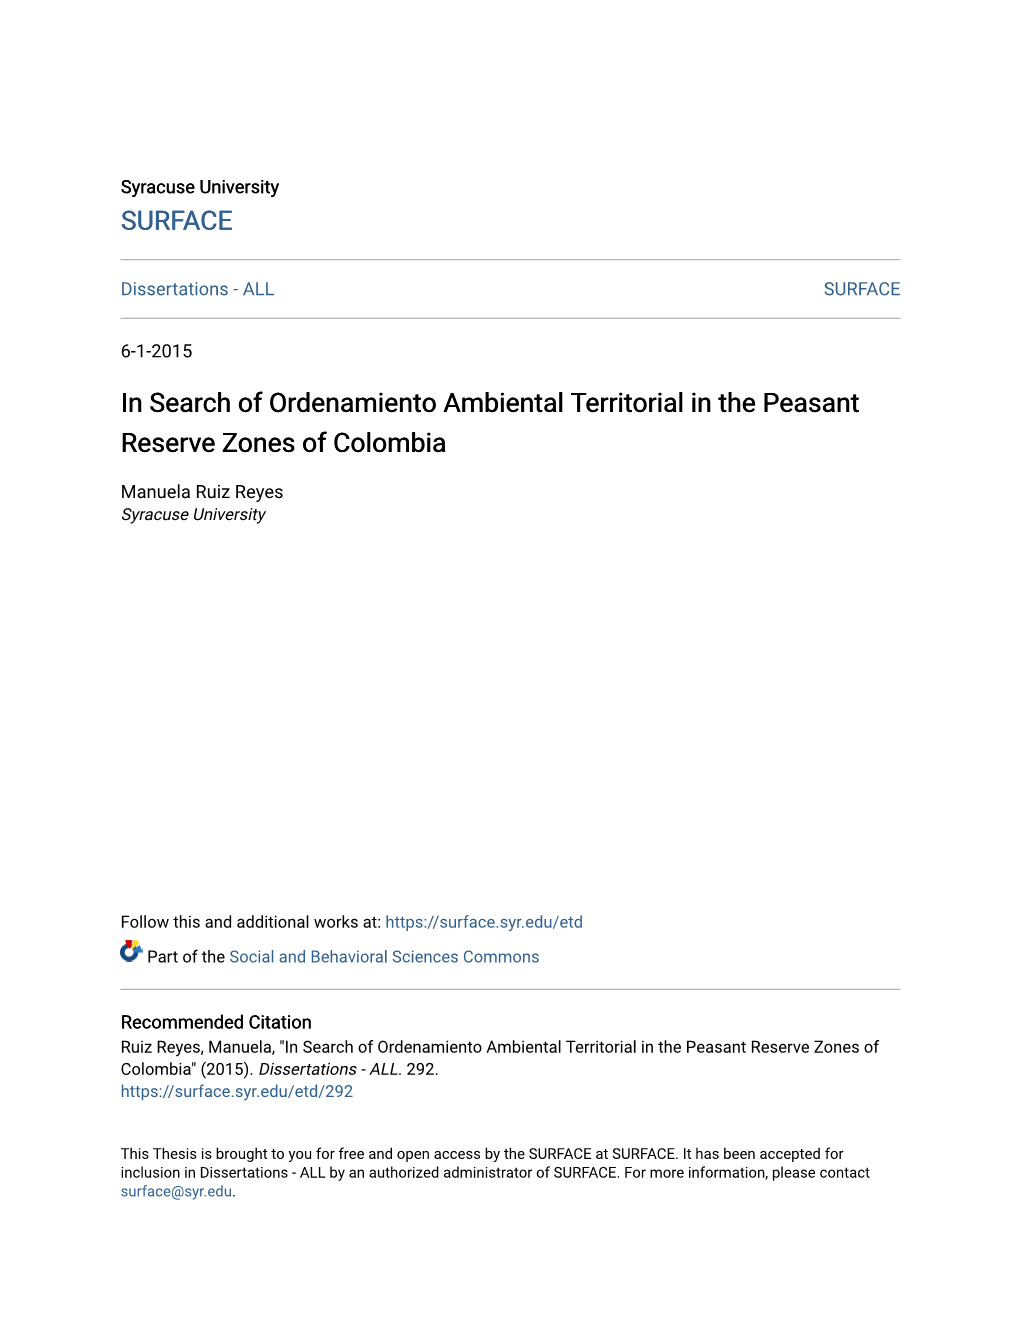 In Search of Ordenamiento Ambiental Territorial in the Peasant Reserve Zones of Colombia